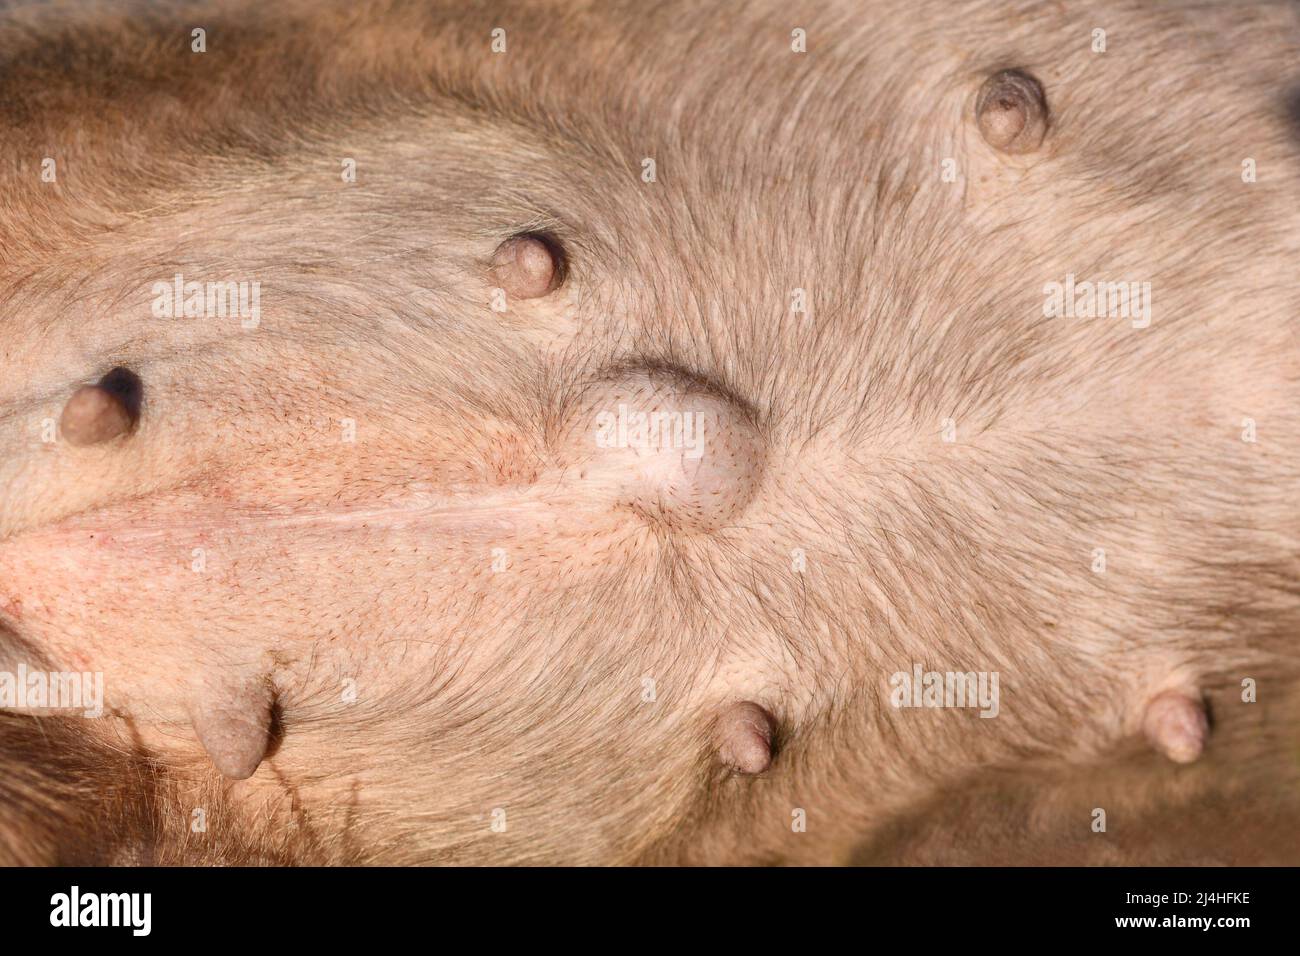 Umbilical Hernia in dog. Bulldog belly with outward bulging around the umbilicus Stock Photo